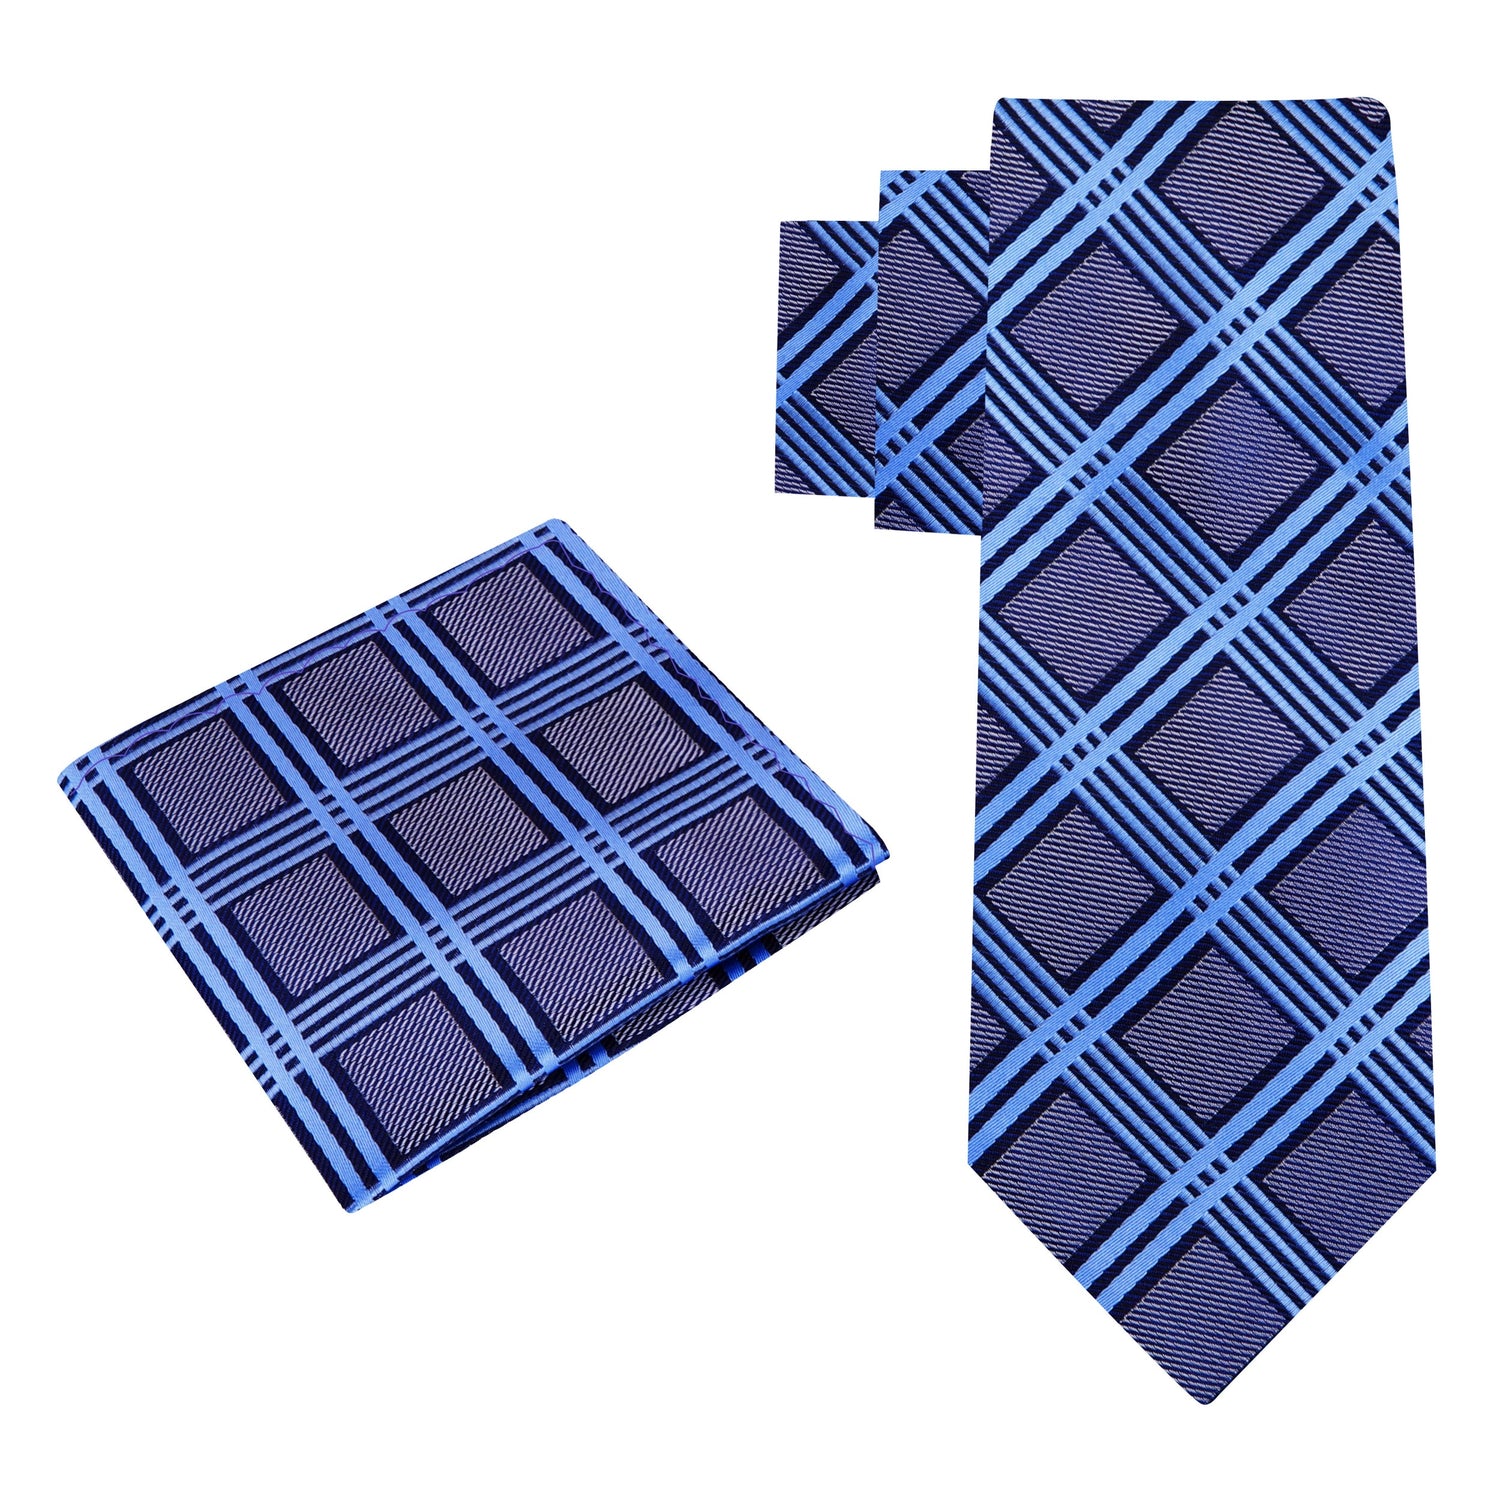 Alt View: A Grey With Light Blue Intersecting Lines Pattern Silk Necktie, Matching Pocket Square